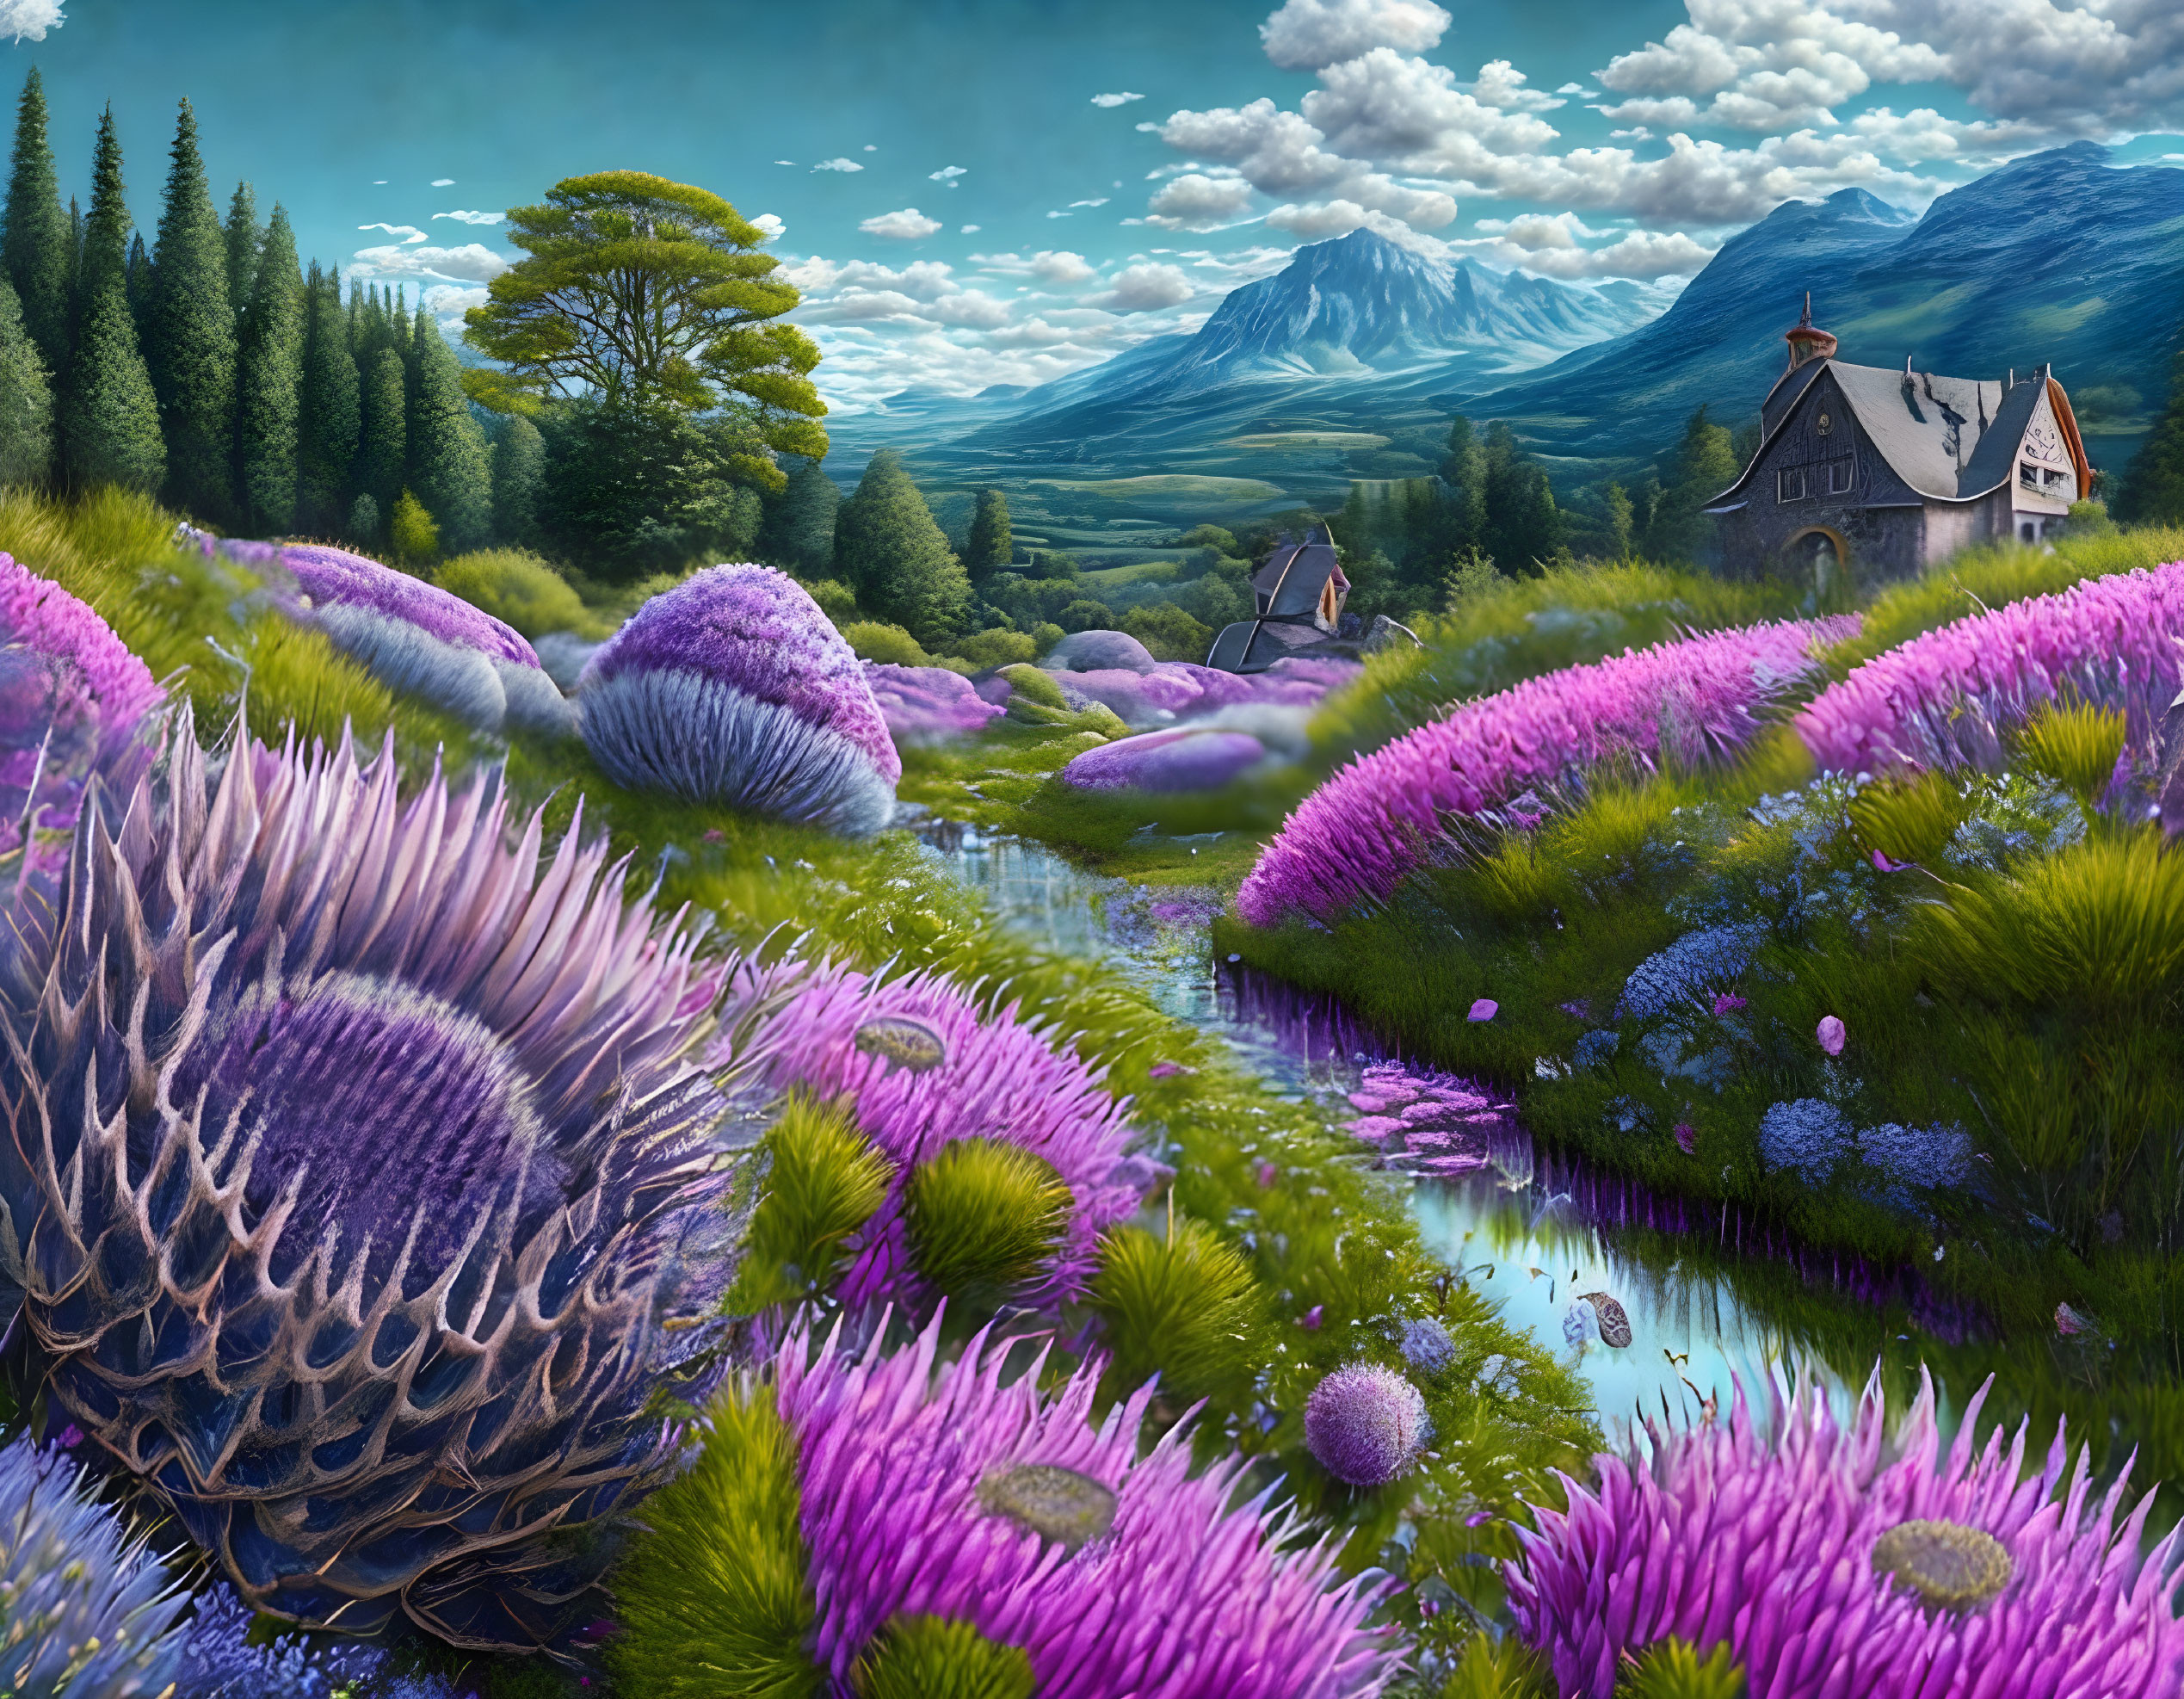  Wonderful landscape with Thistle Flowers